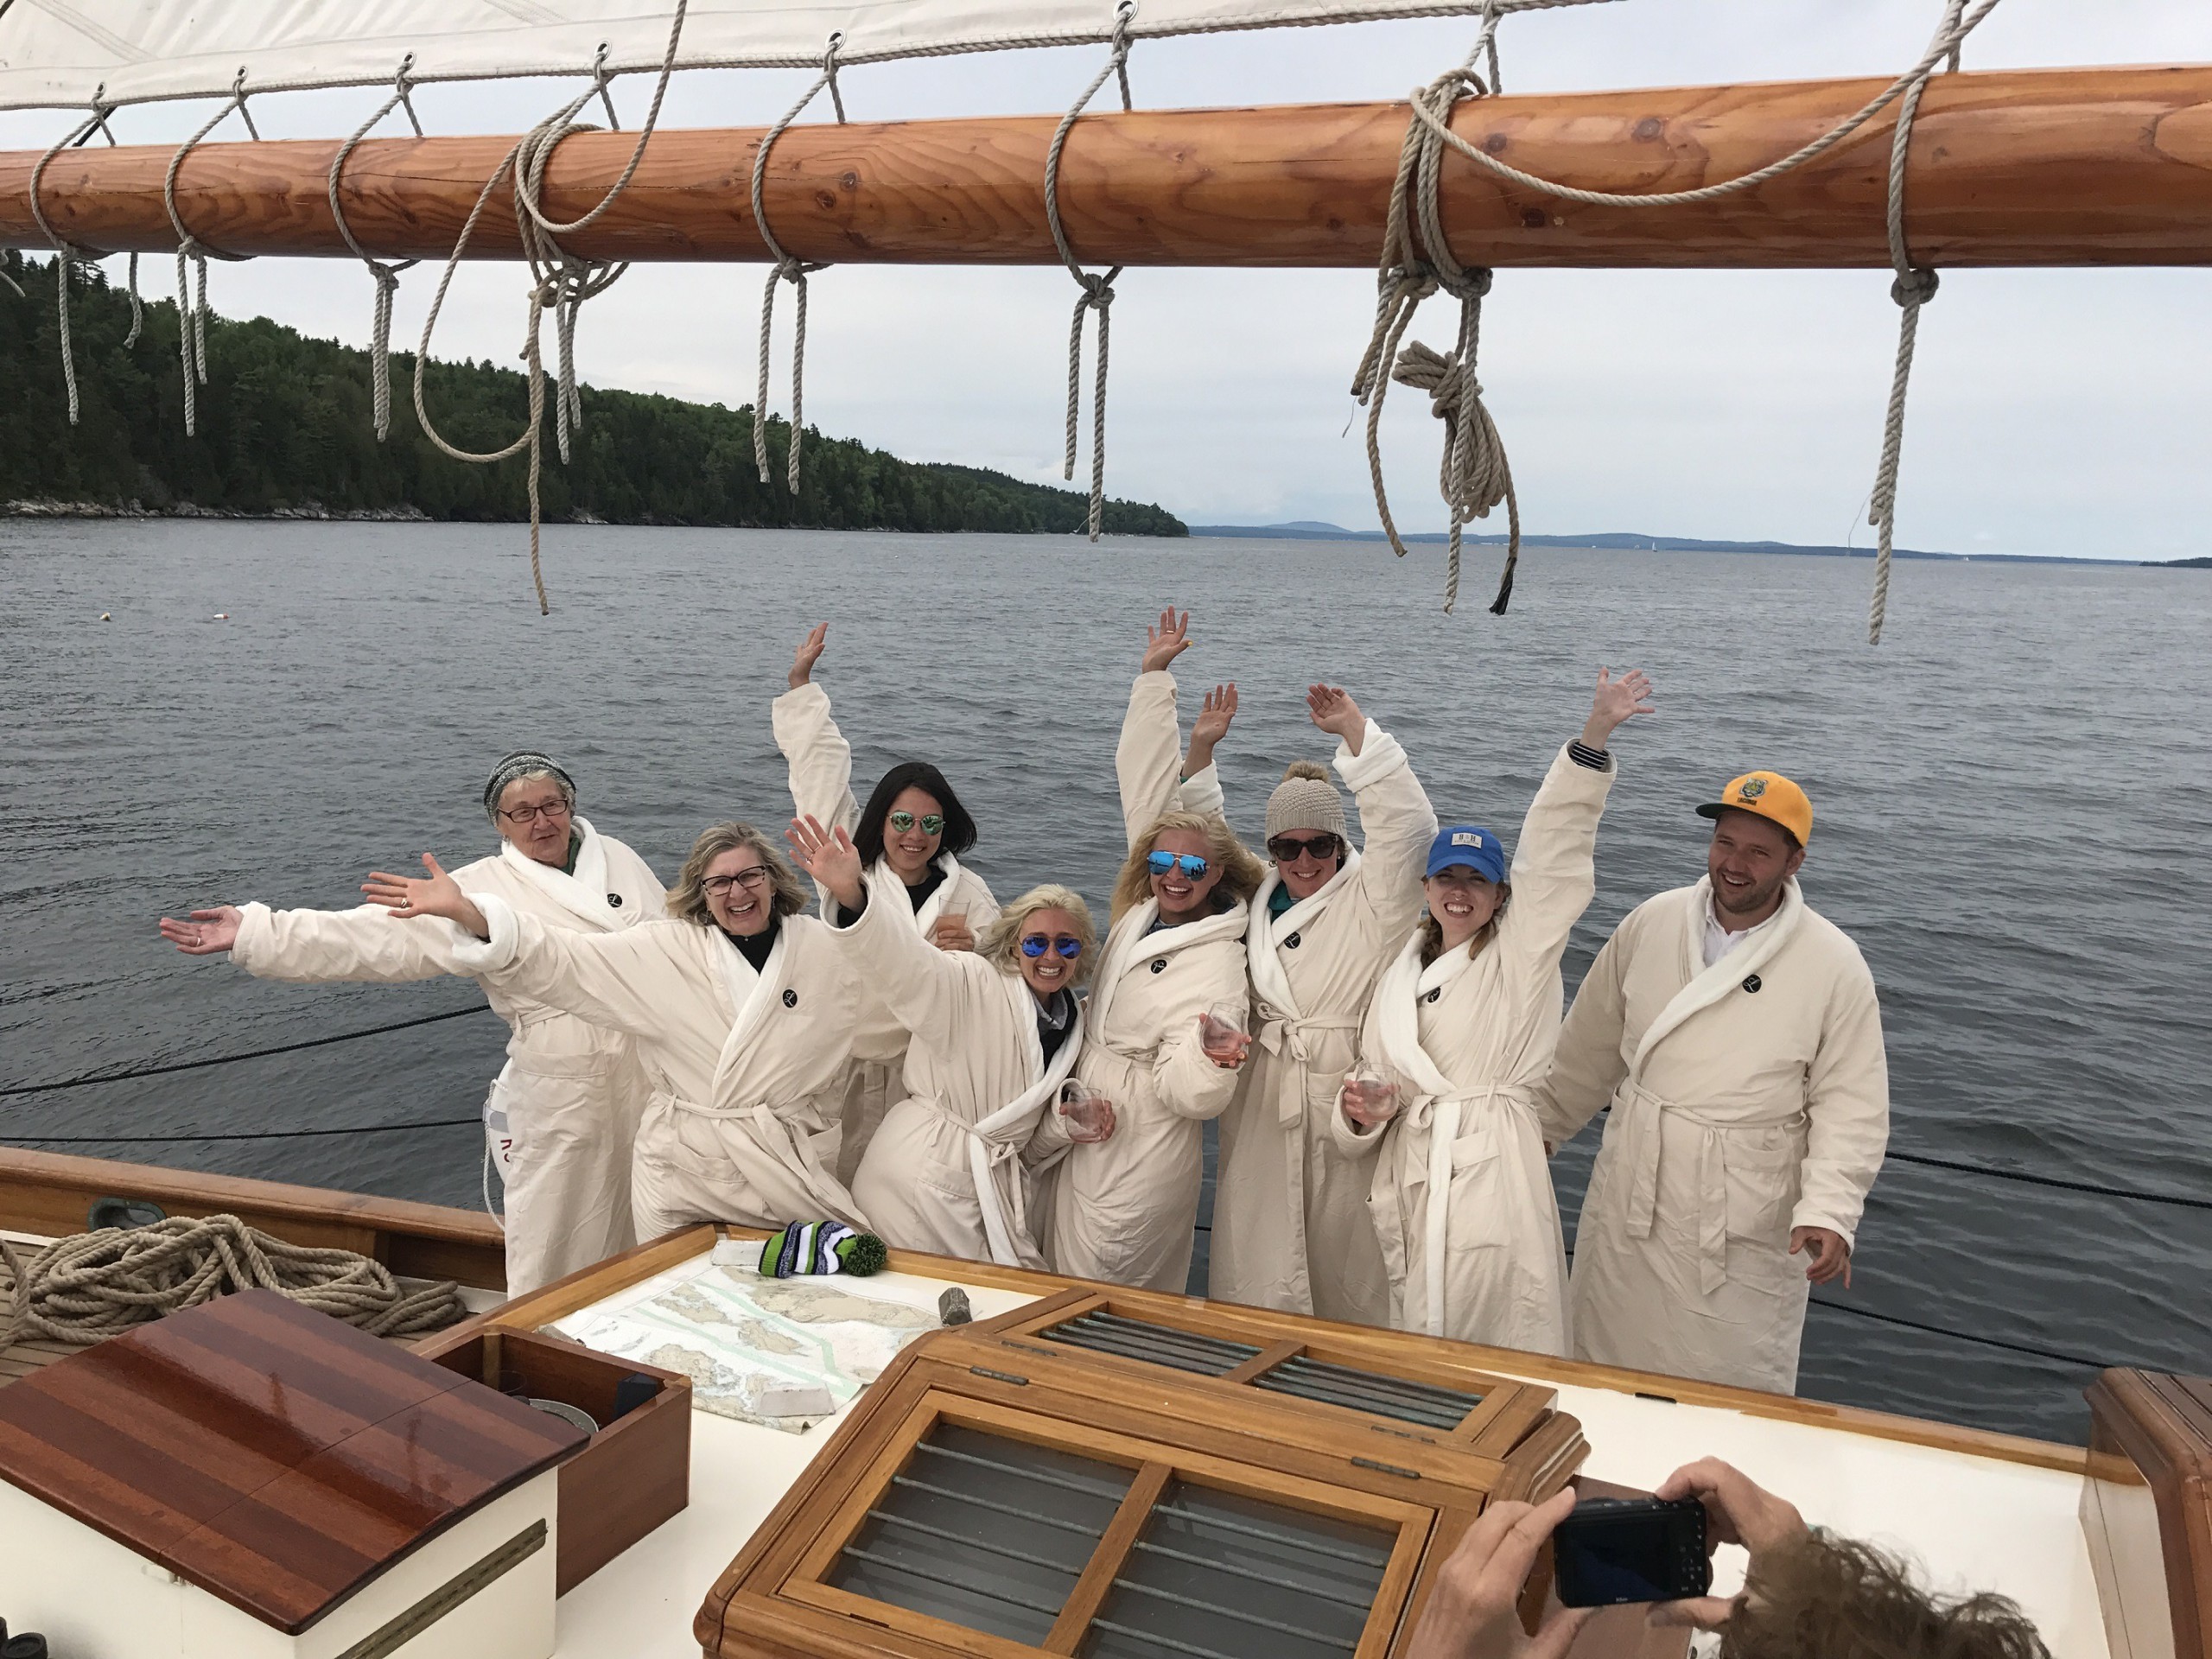 Schooner Ladona offers guests embroidered bathrobes in each cabin